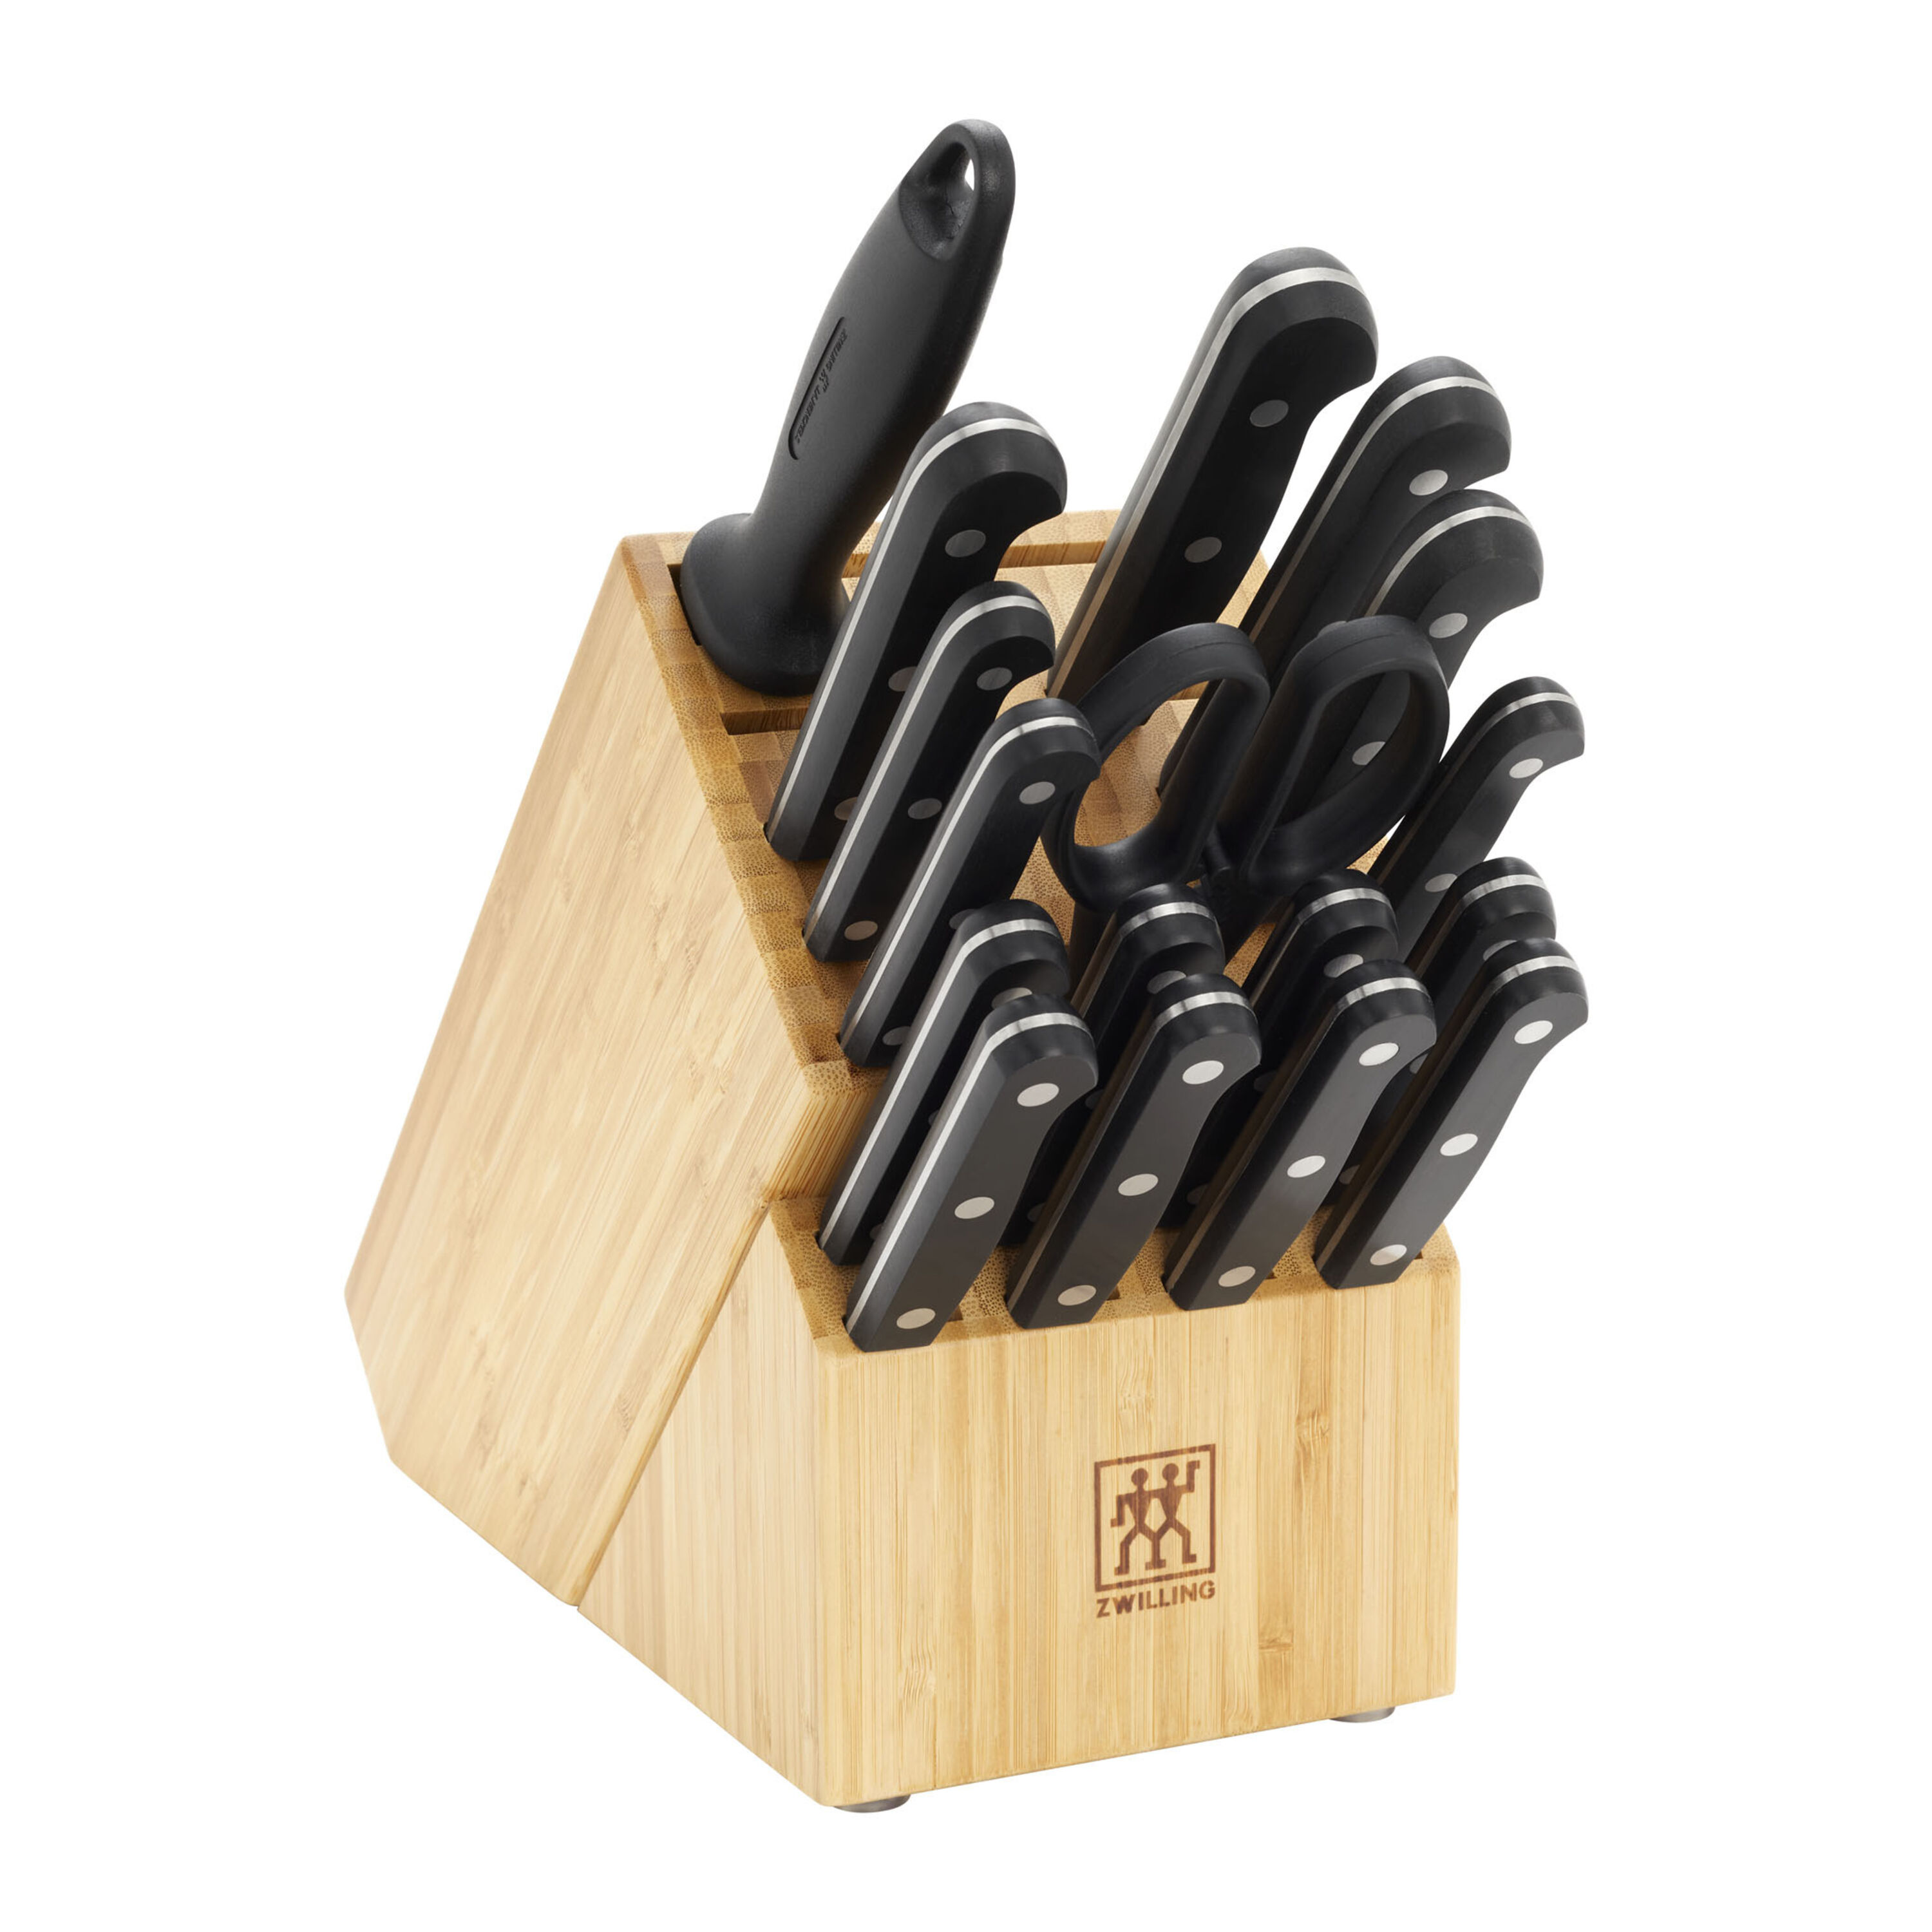 Zwilling Twin Gourmet Classic 8-Pc Steak Knife Set with Wood Case